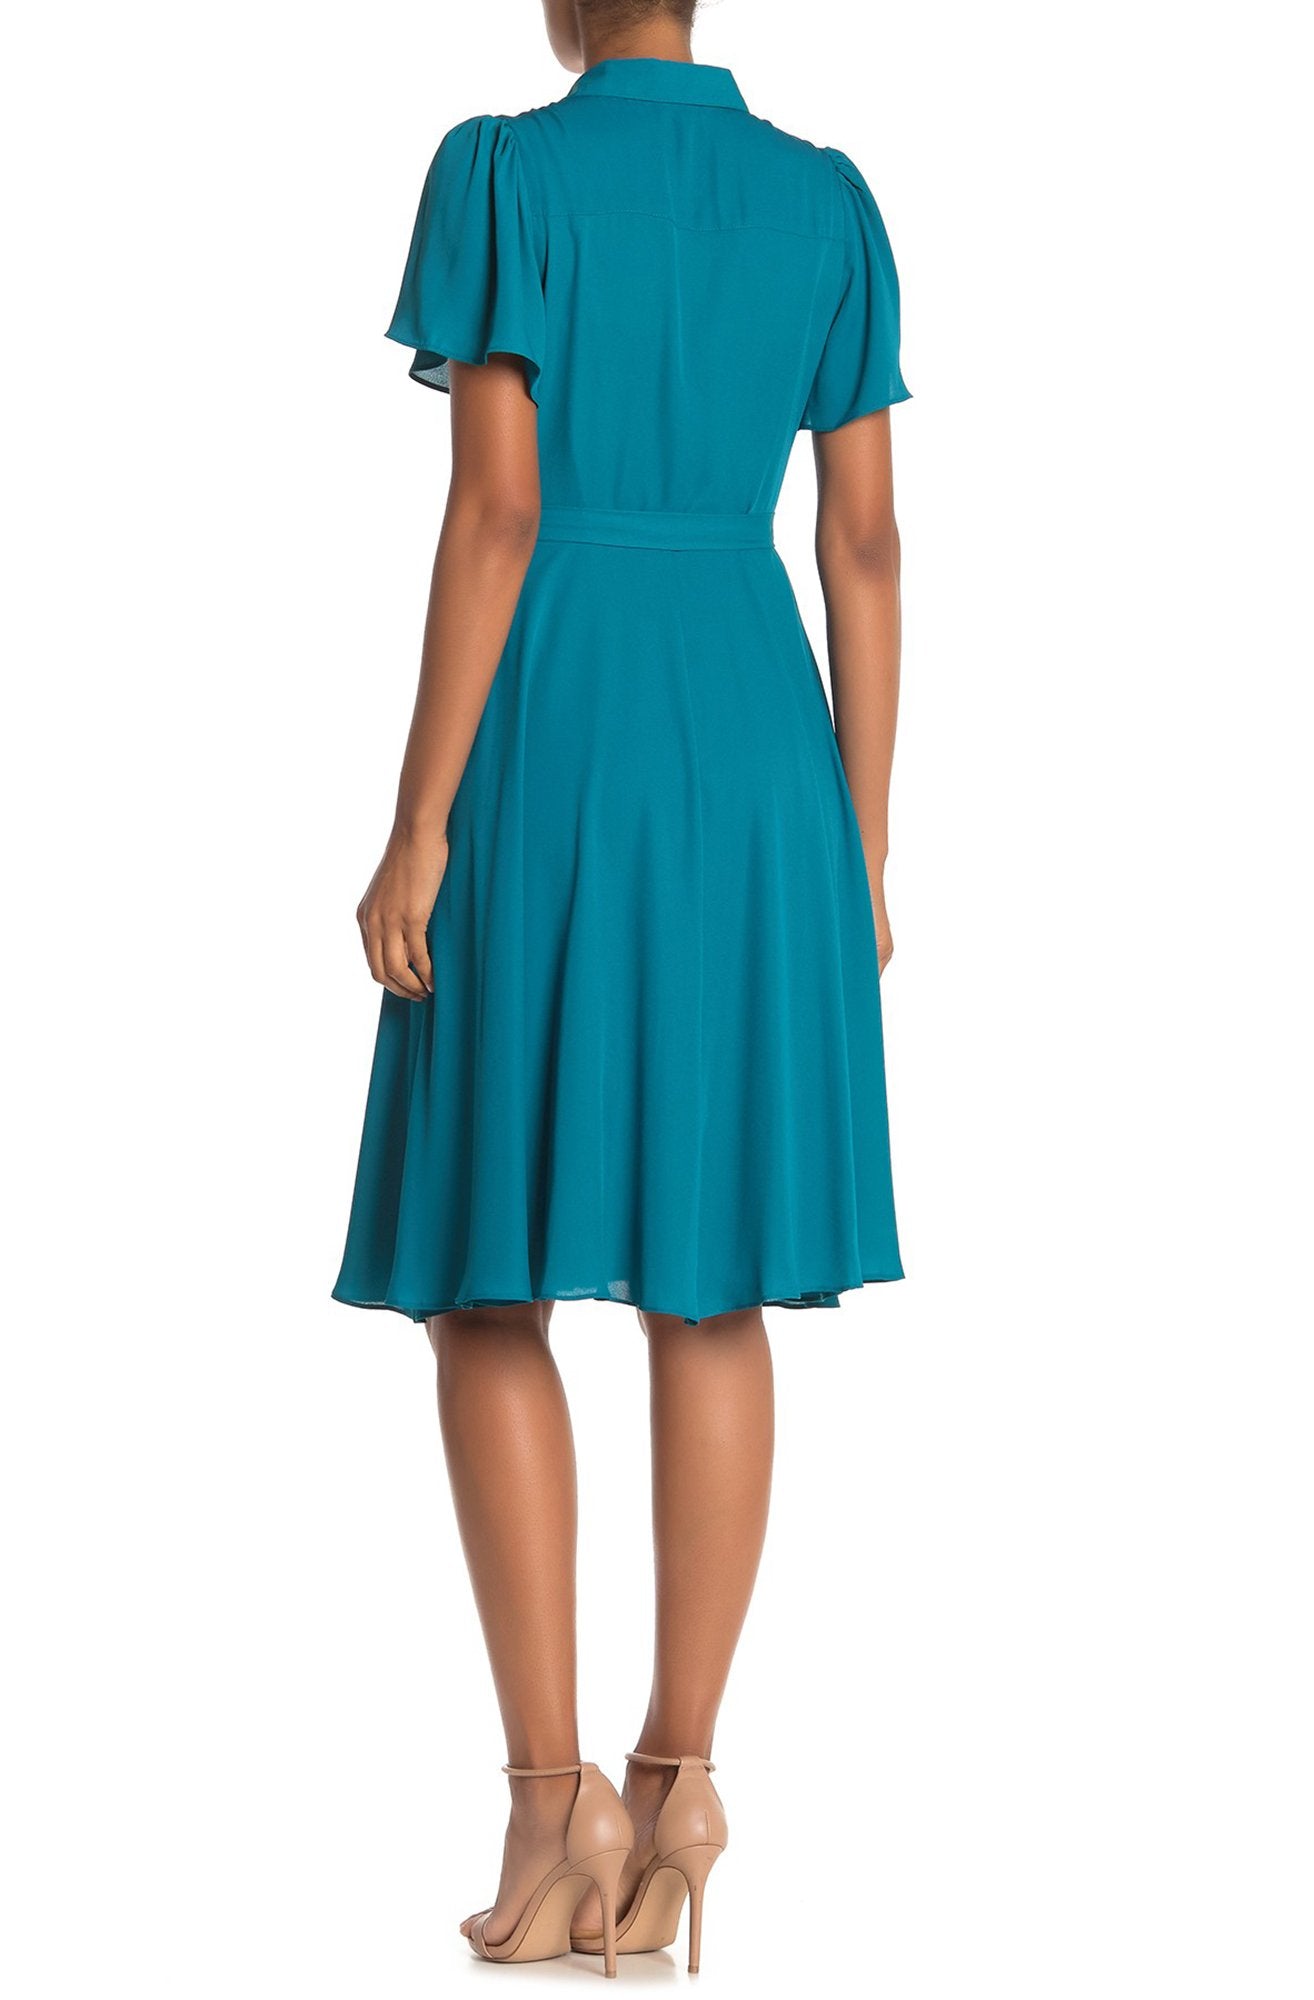 Nanette Nanette Leo - NM9K136X4 Short Sleeve Collared A-line Dress In Blue and Green